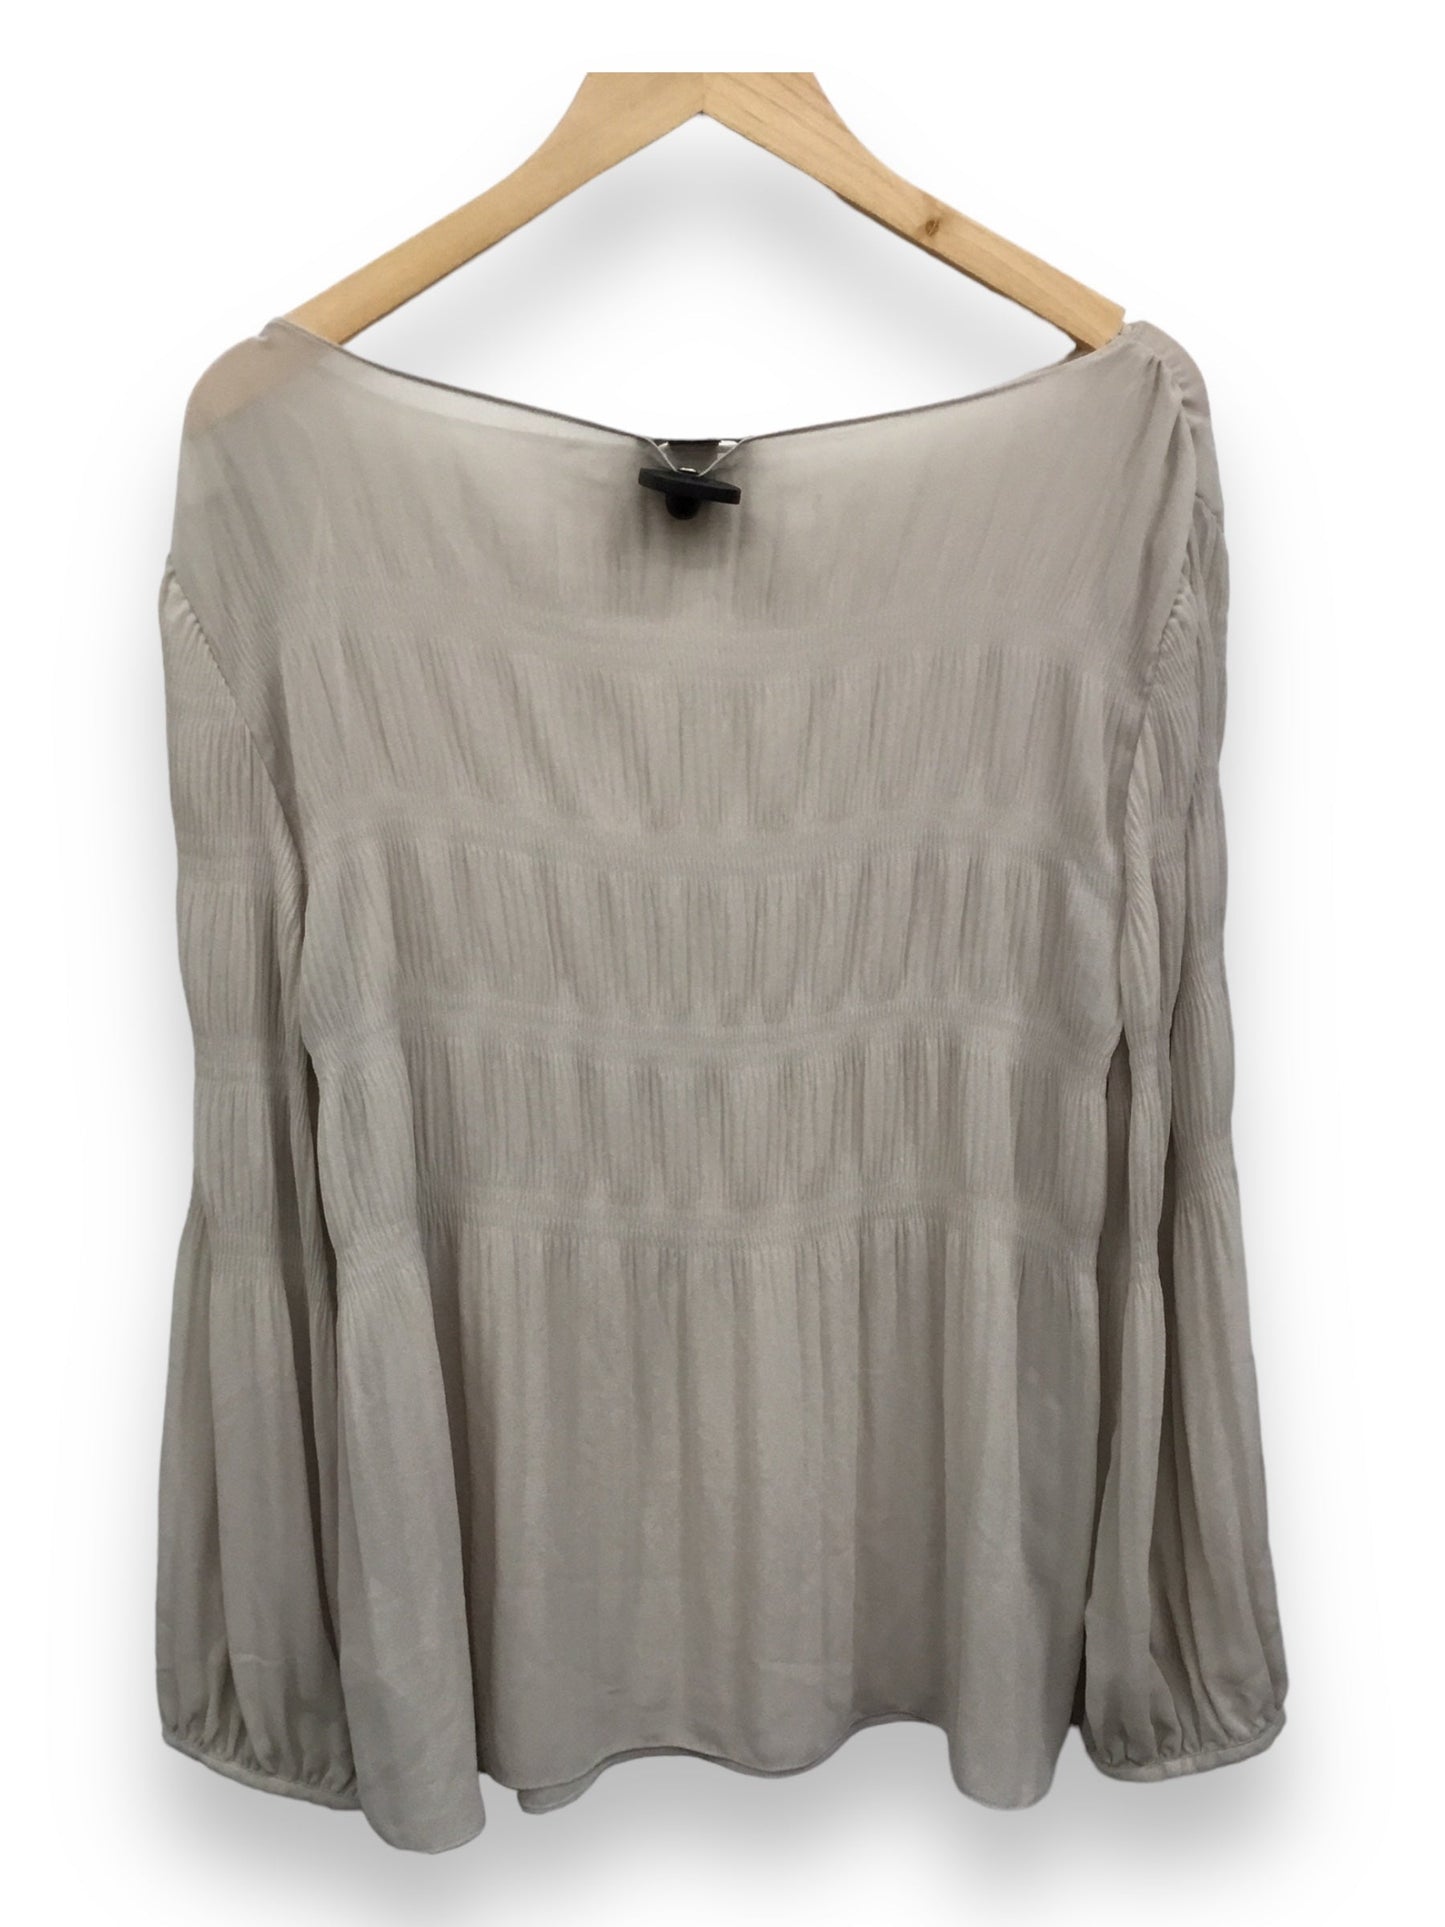 Taupe Top Long Sleeve H&m, Size L